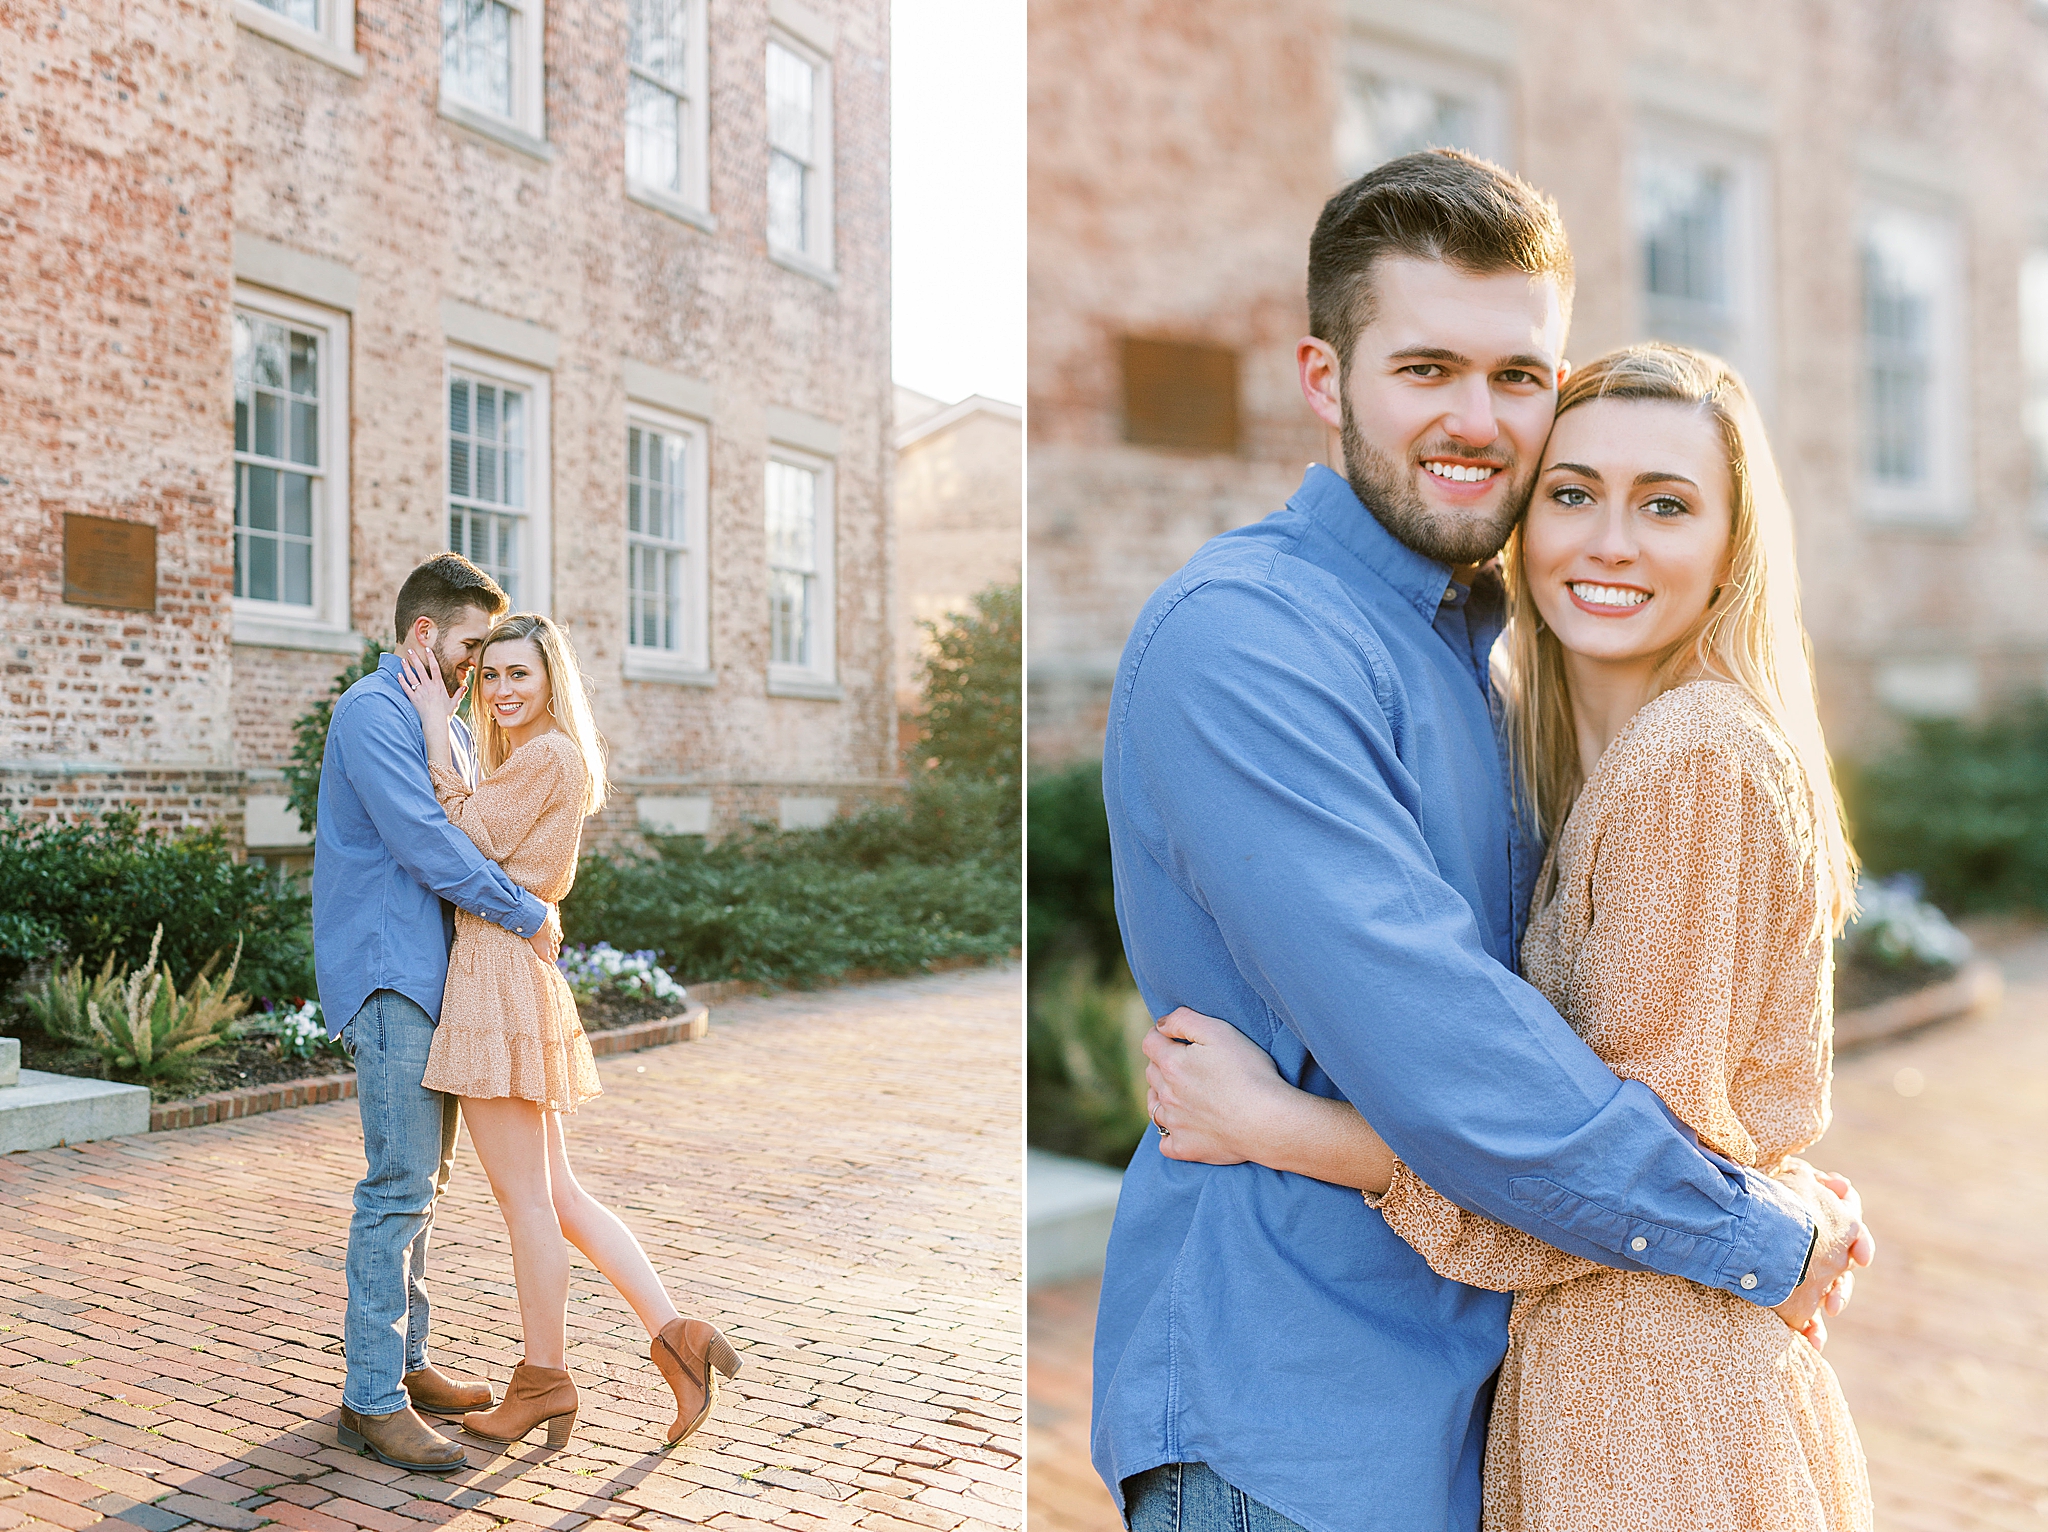 Chapel Hill engagement session during the winter at sunset